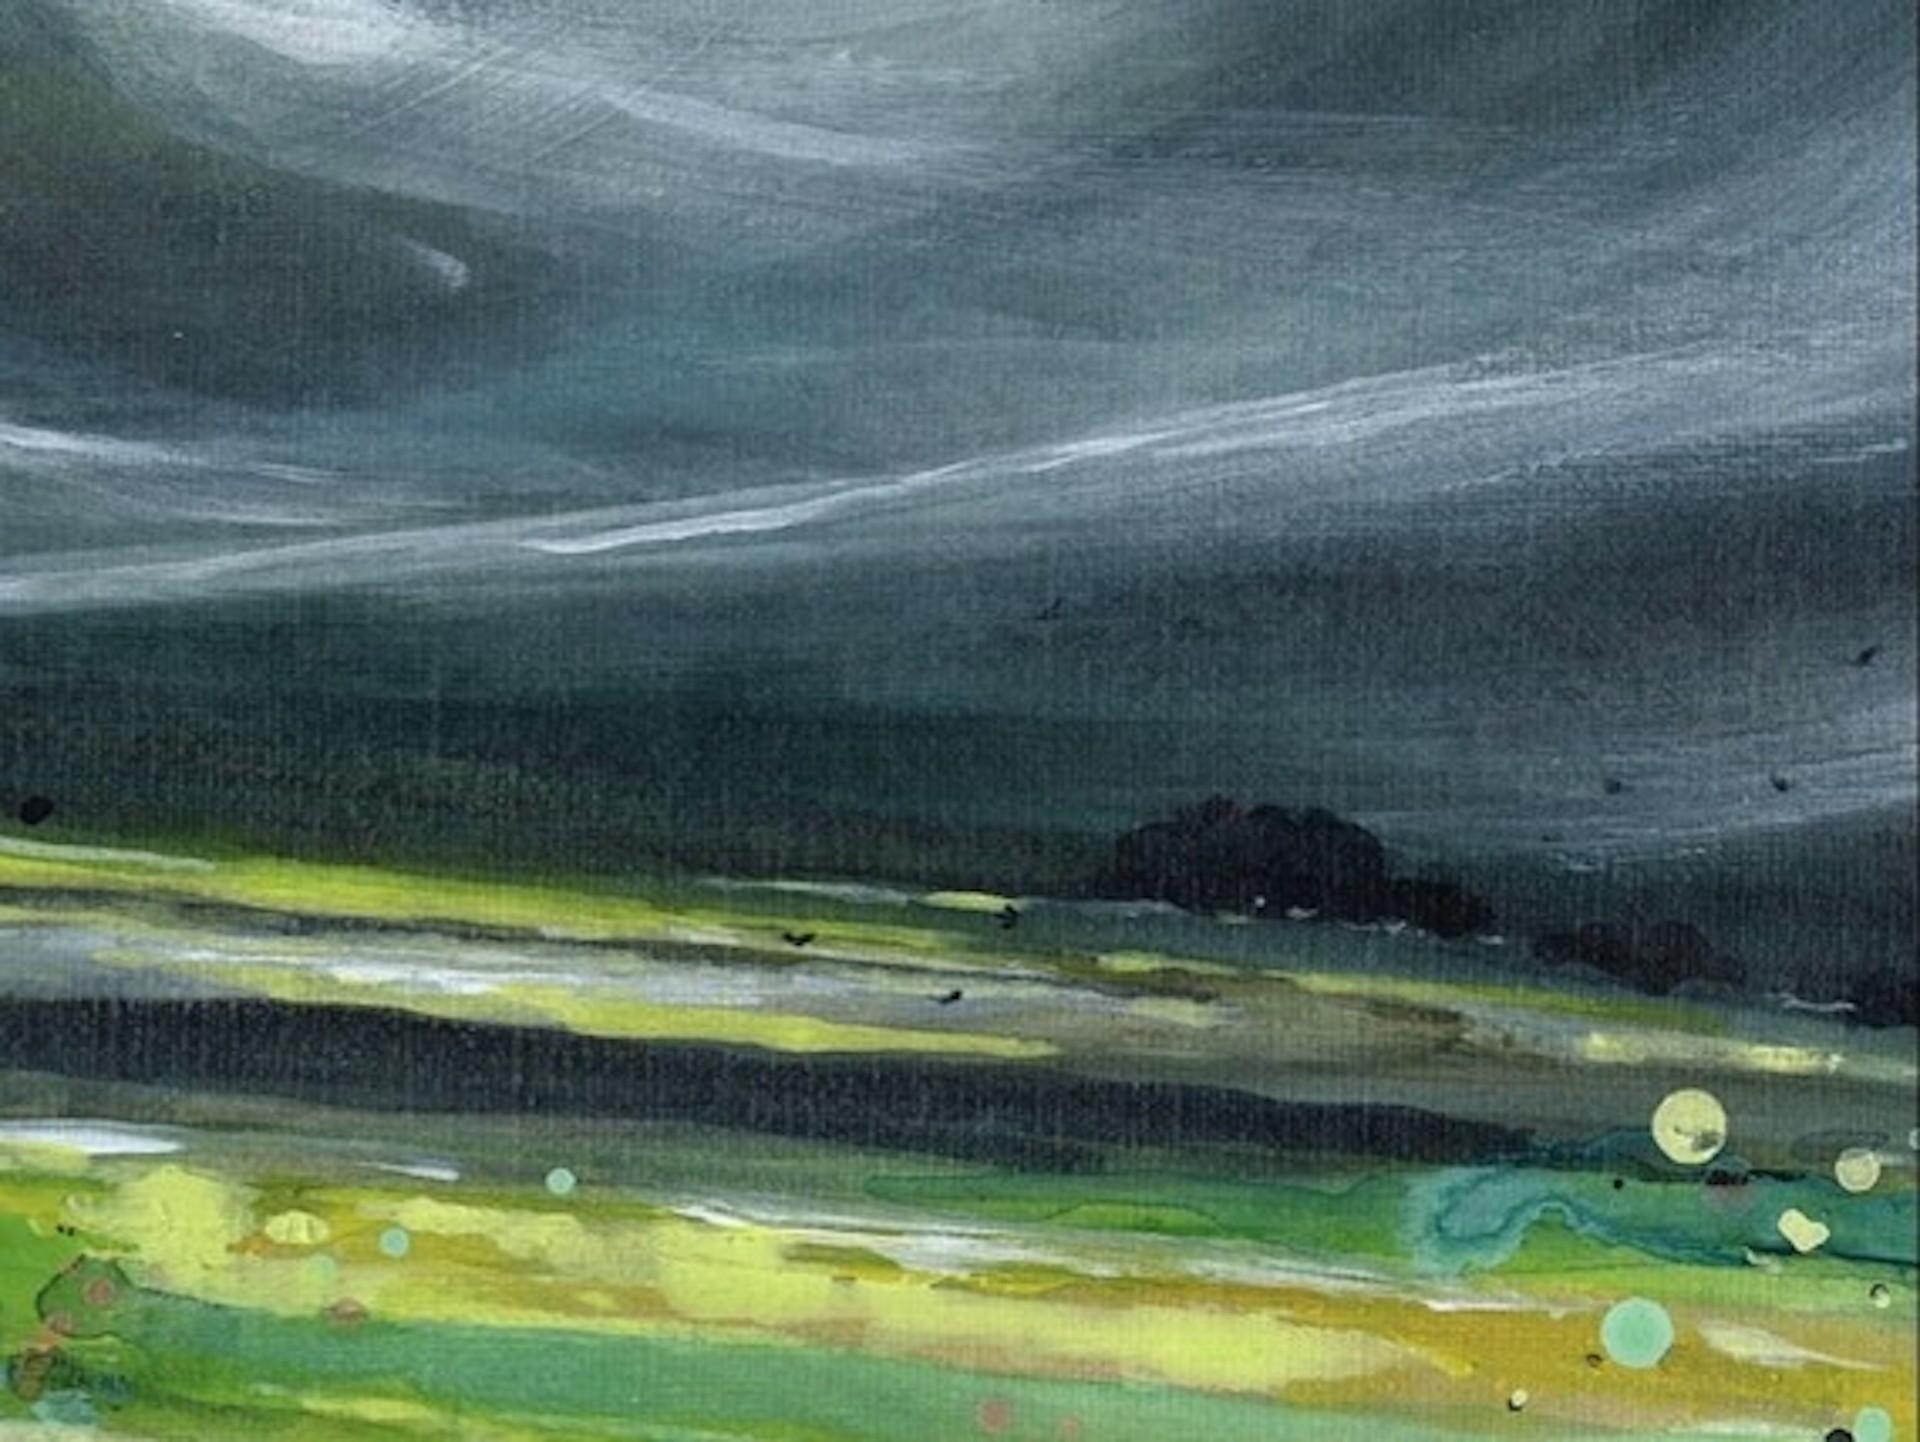 Walking in the Storm [2020]
Original
Landscape
Acrylic and acrylic inks
Image Size: H:20 cm x W:30 cm
Framed Size: H:23 cm x W:33 cm x D:4cm
Sold Framed
Please note that insitu images are purely an indication of how a piece may look

Walking in the